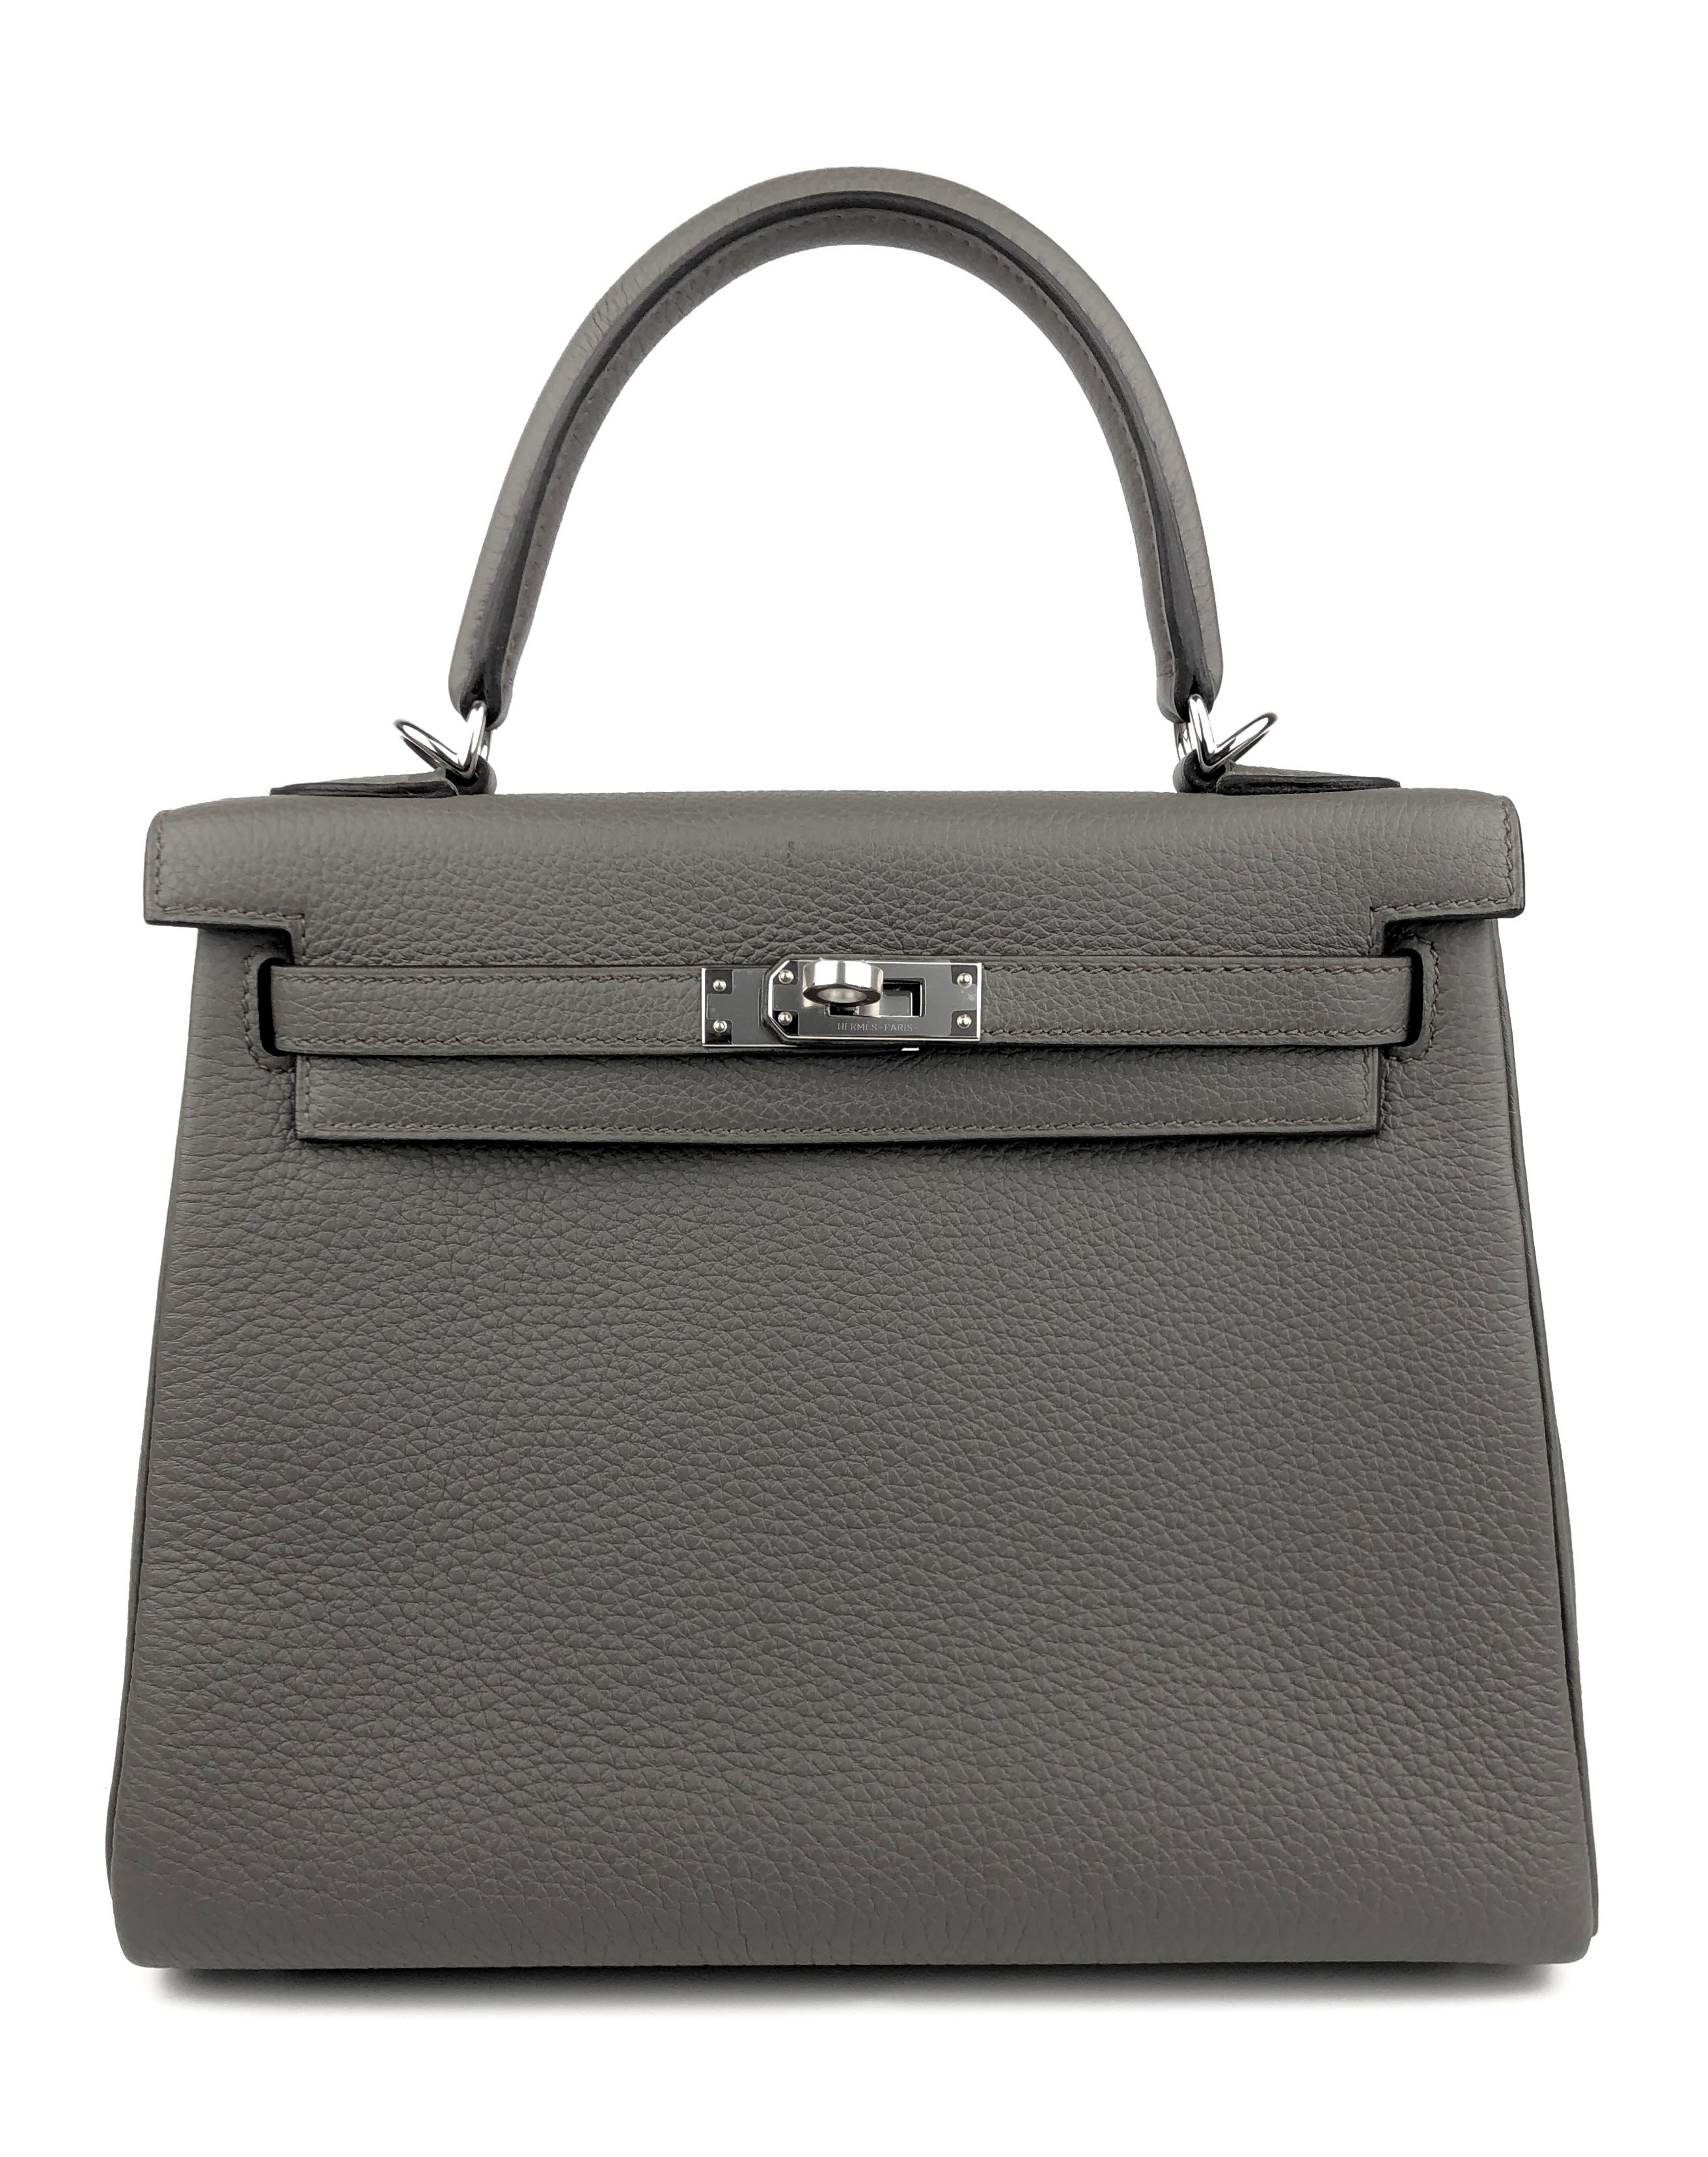 Stunning As New Hermes Kelly 25 EtainTogo Leather Palladium Hardware. Z Stamp 2021. 

Shop with Confidence from Lux Addicts. Authenticity Guaranteed! 